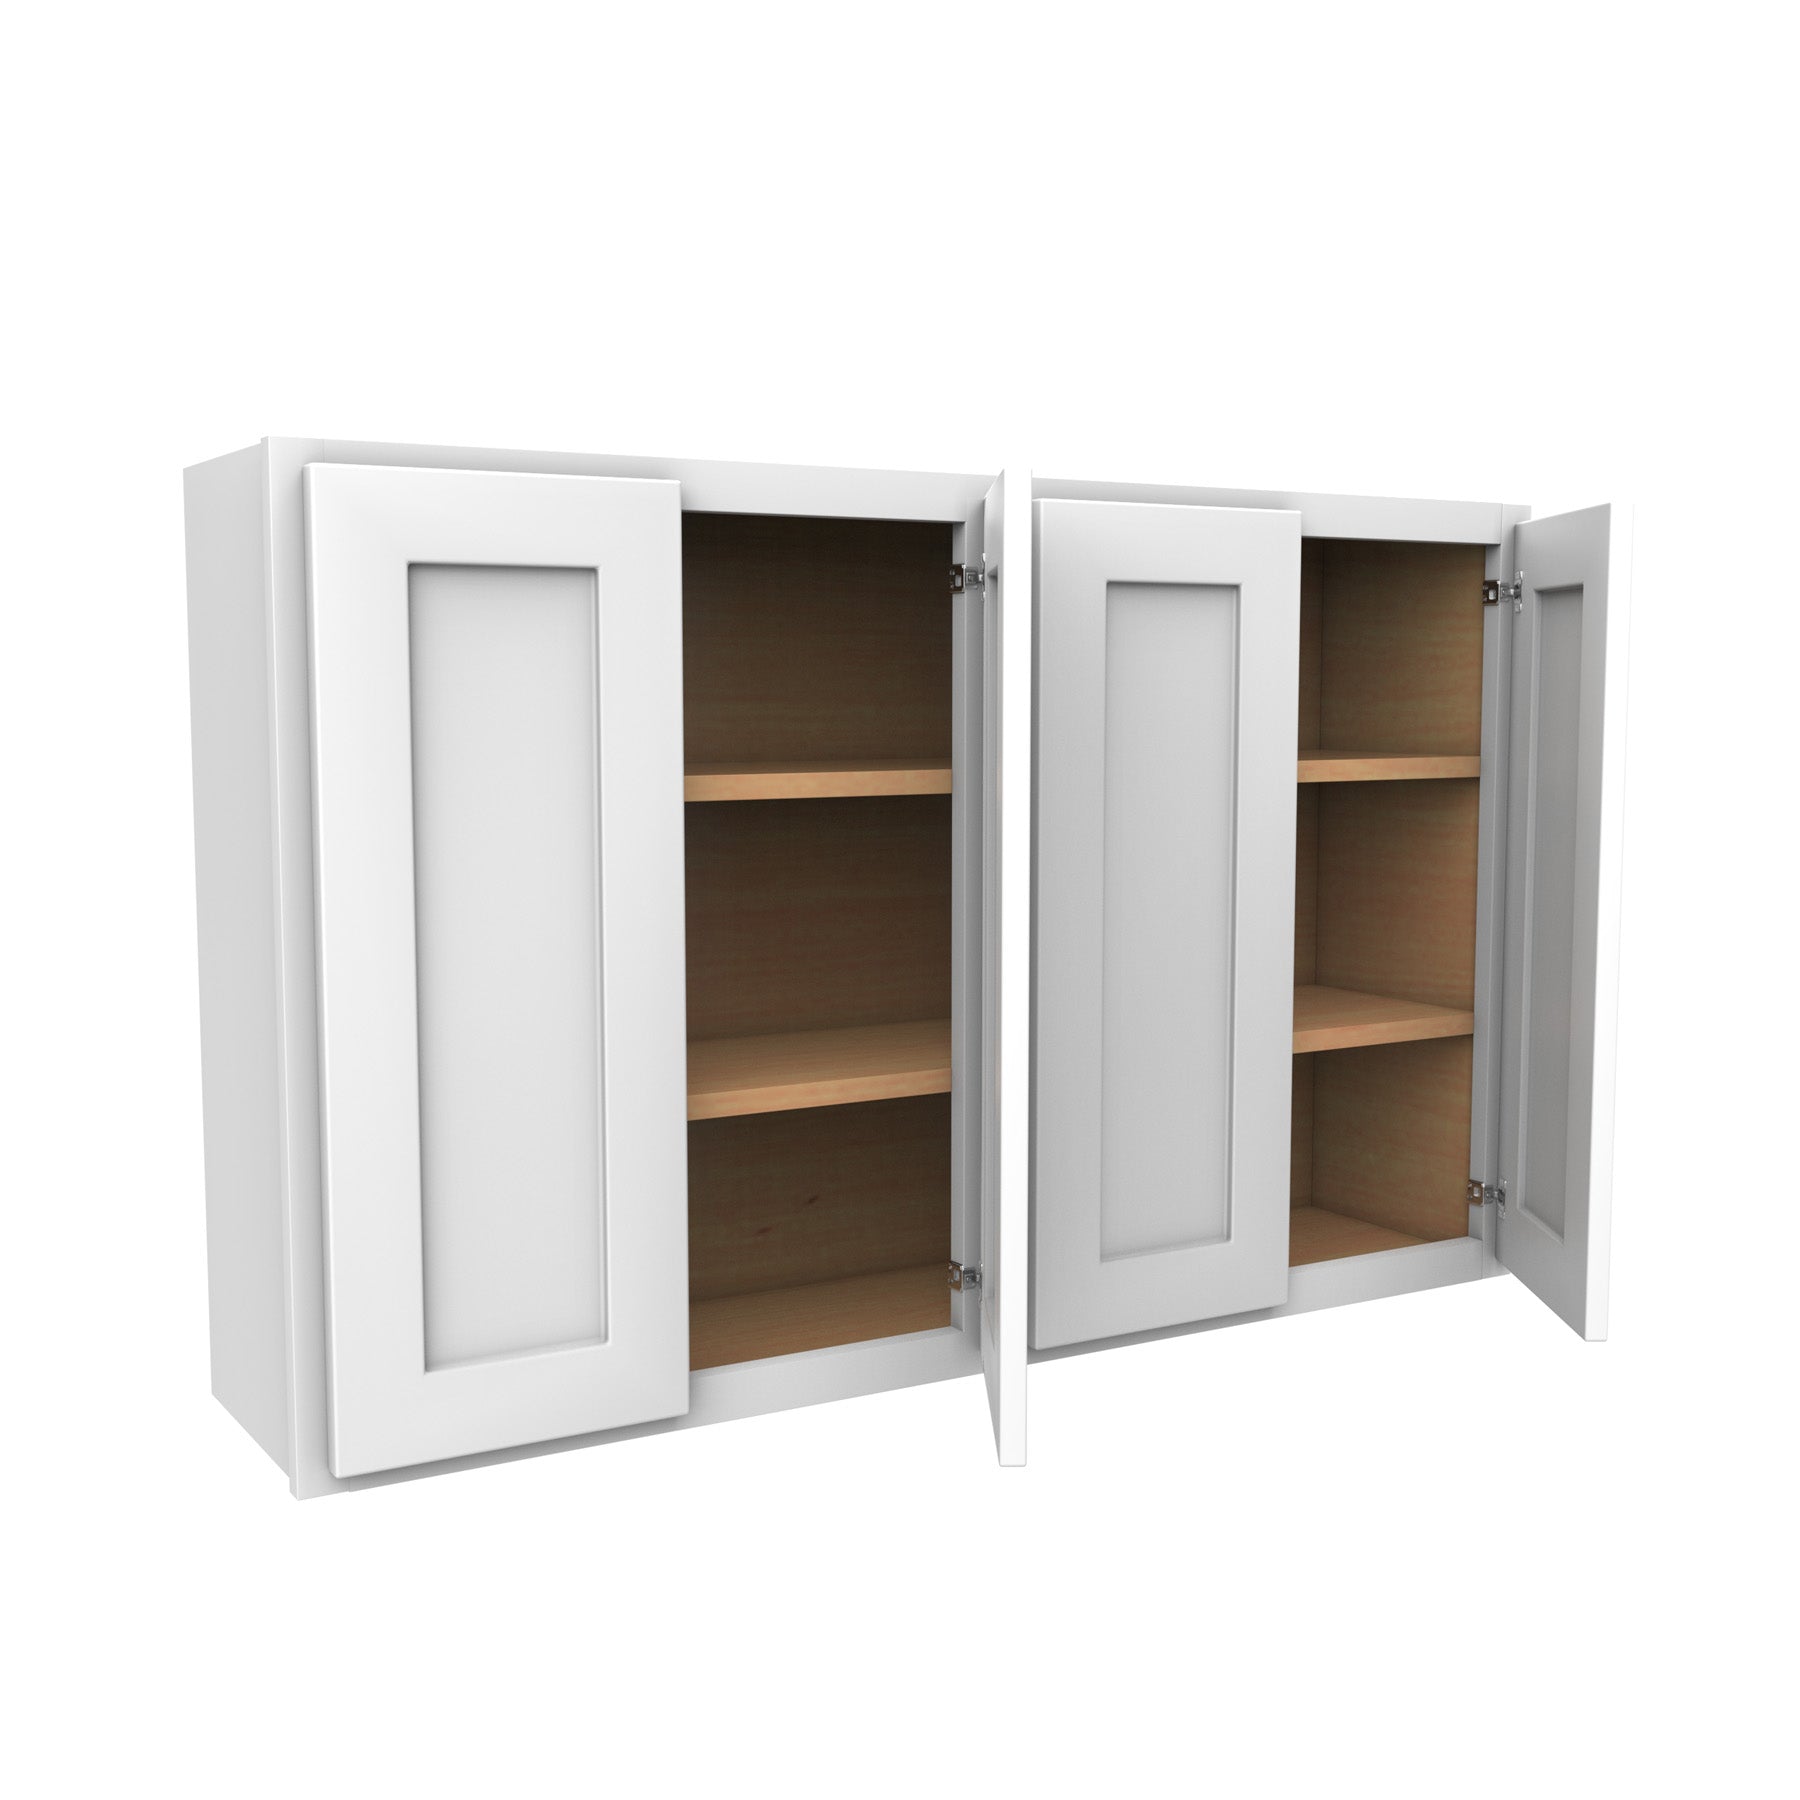 30 Inch High 4 Door Wall Cabinet - Luxor White Shaker - Ready To Assemble, 48"W x 30"H x 12"D